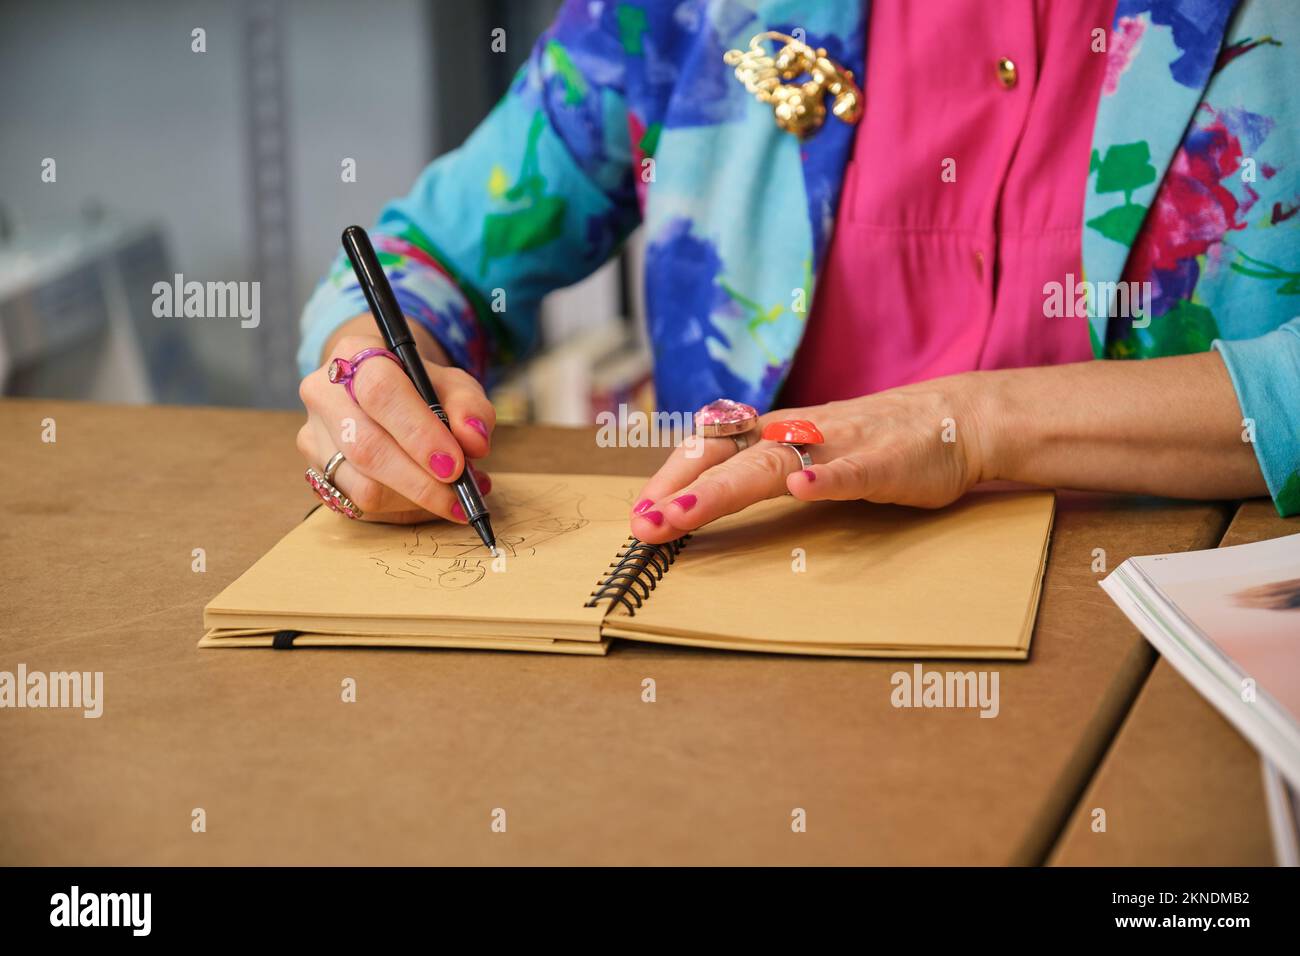 Unrecognizable dressmaker with colorfull clothes drawing new layout. Stock Photo